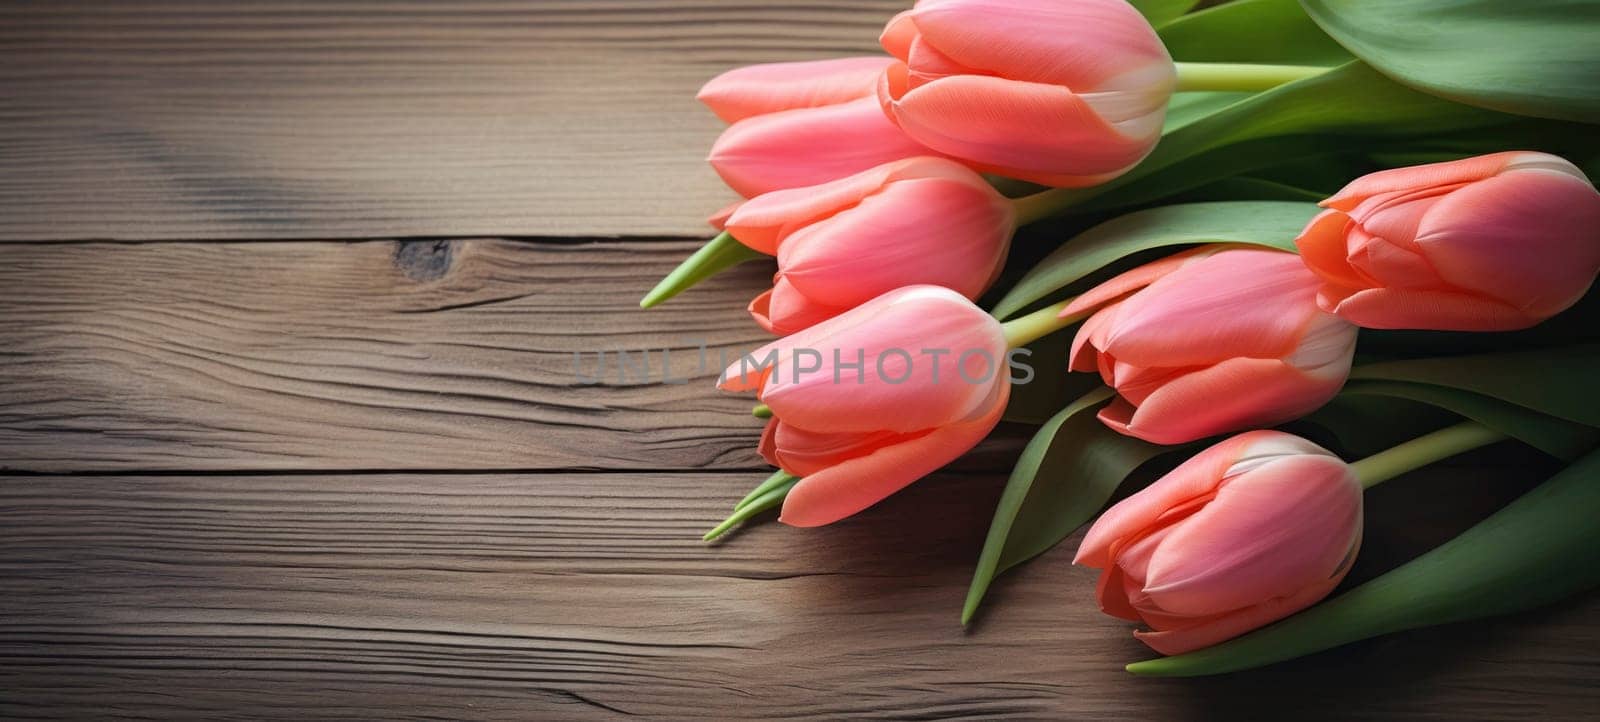 Pink Tulips on Wooden Surface by andreyz